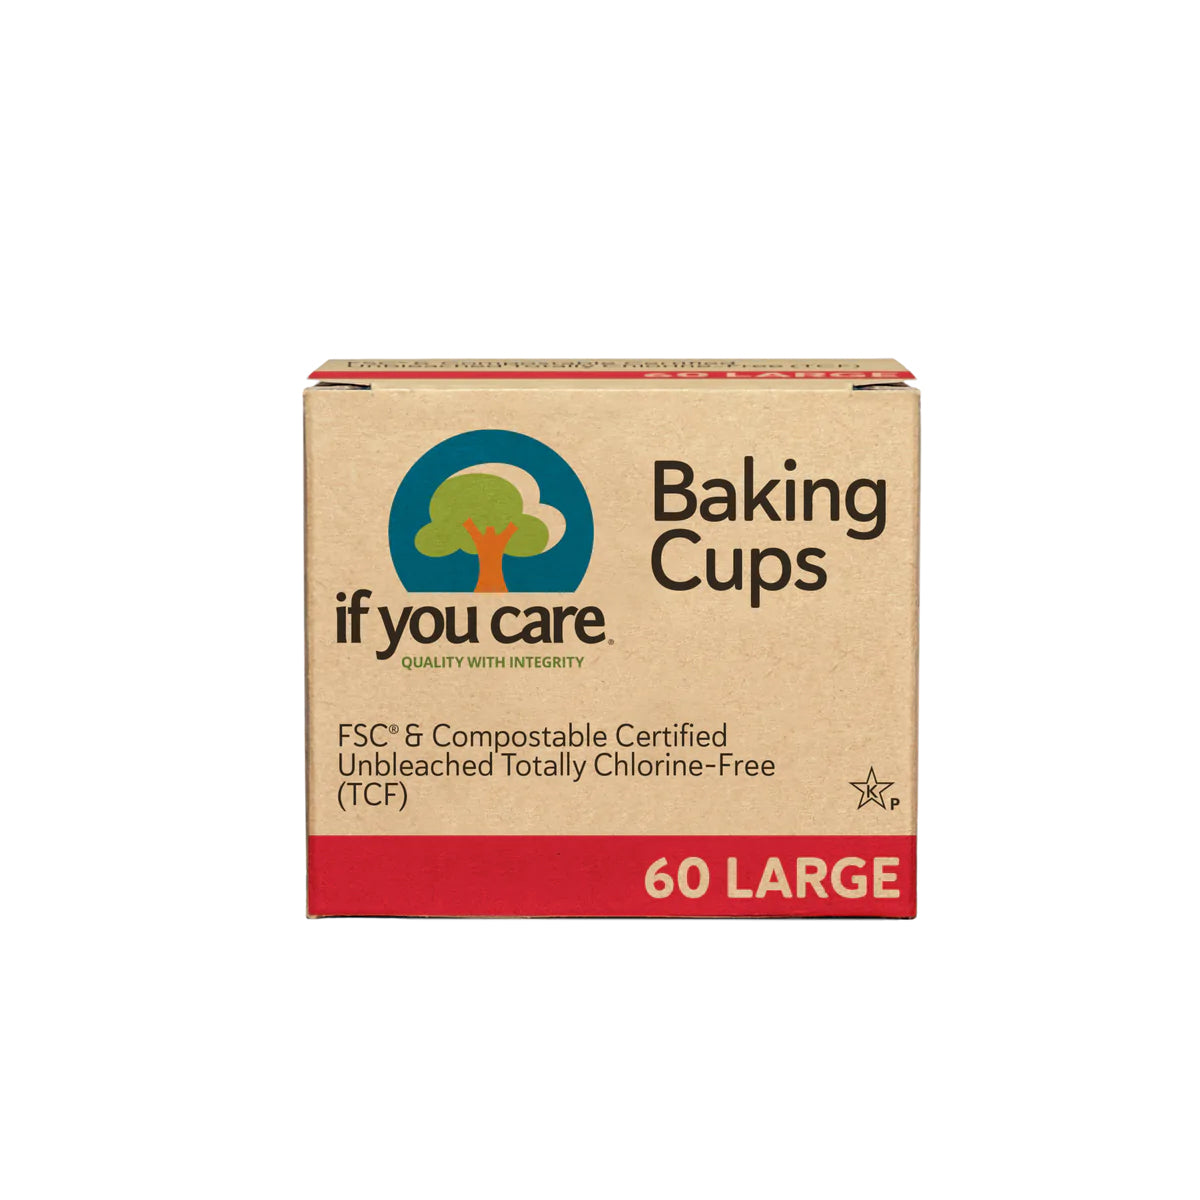 Unbleached Baking Cups※